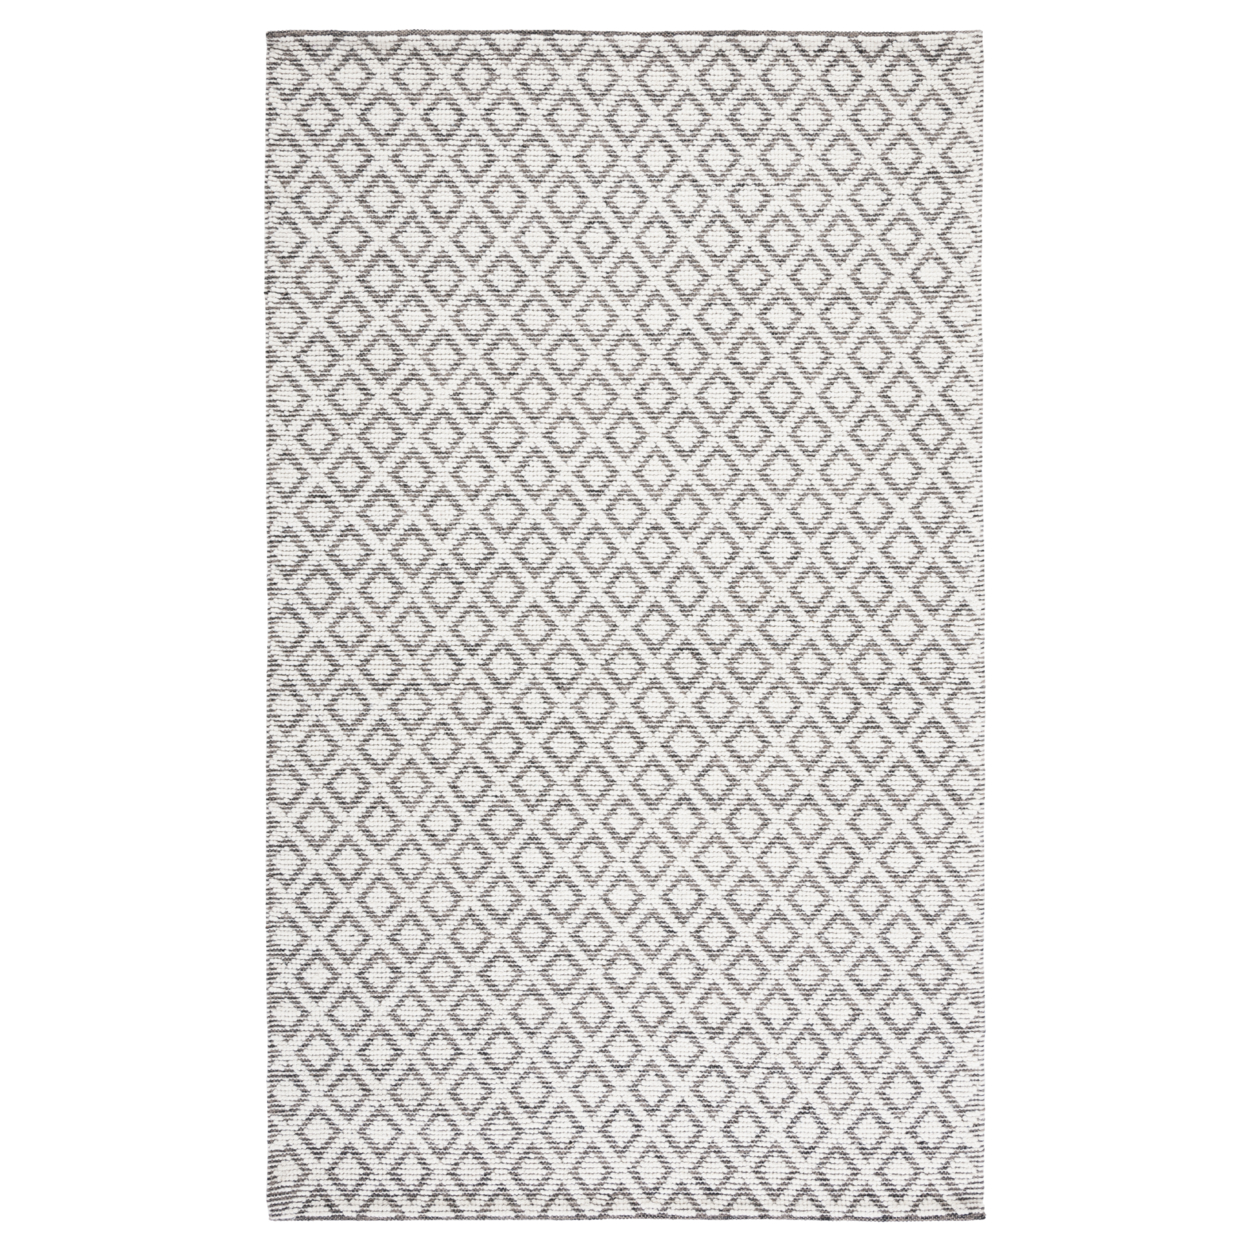 SAFAVIEH Vermont VRM304T Handwoven Ivory / Brown Rug - 6' Square